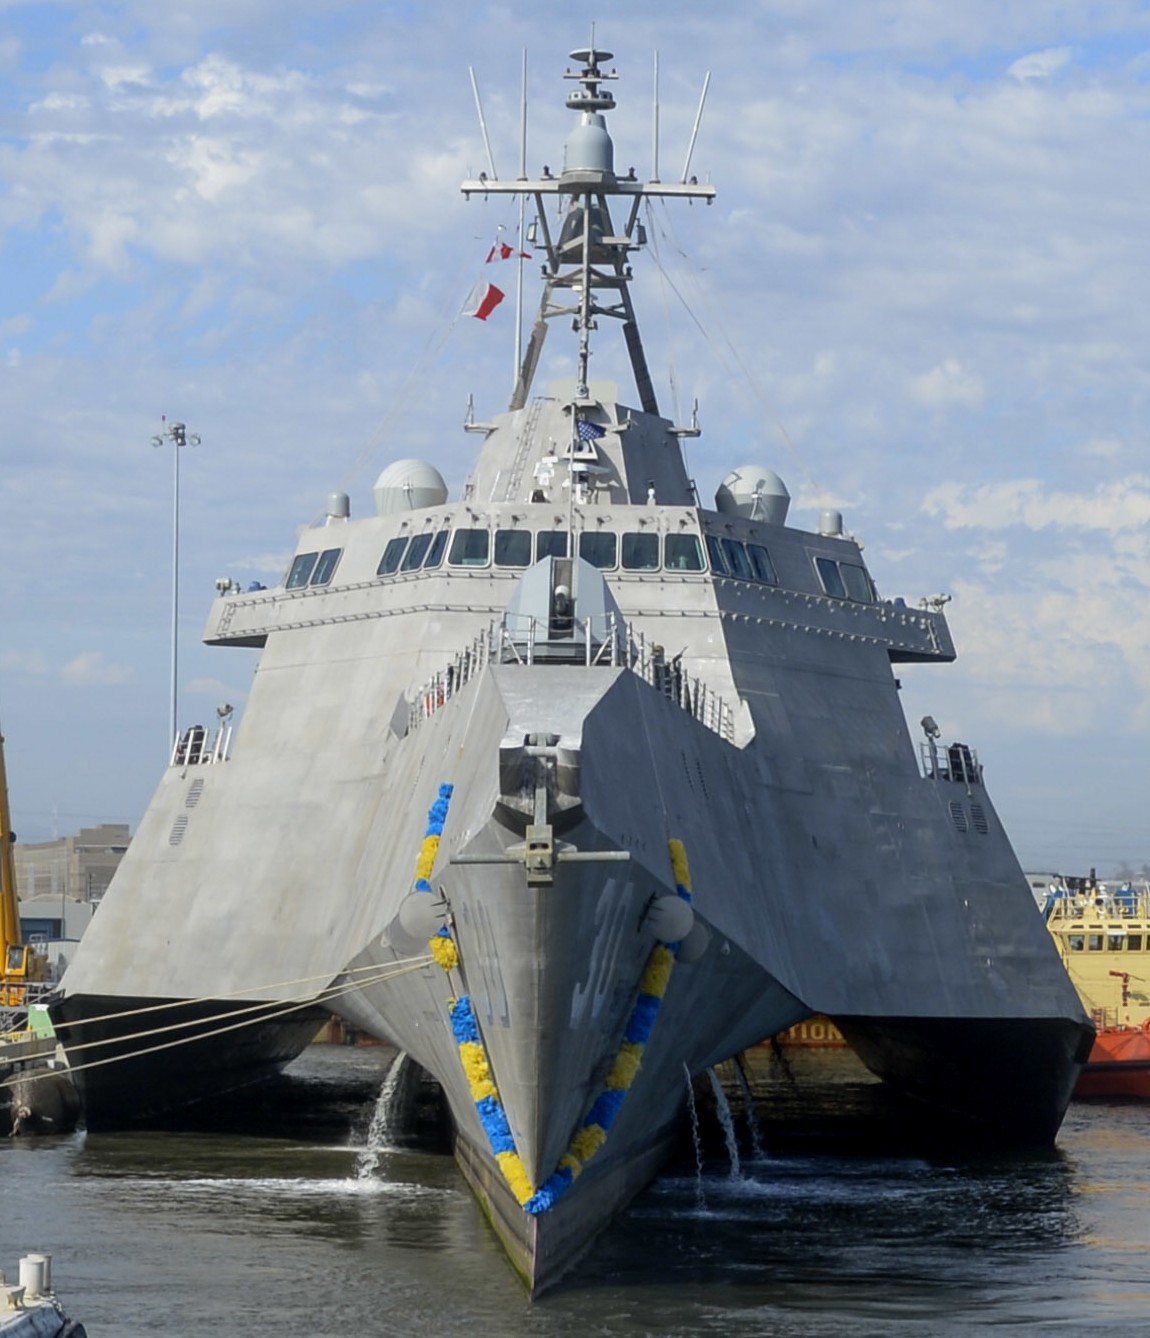 lcs-30 uss canberra littoral combat ship independence class us navy san diego 10